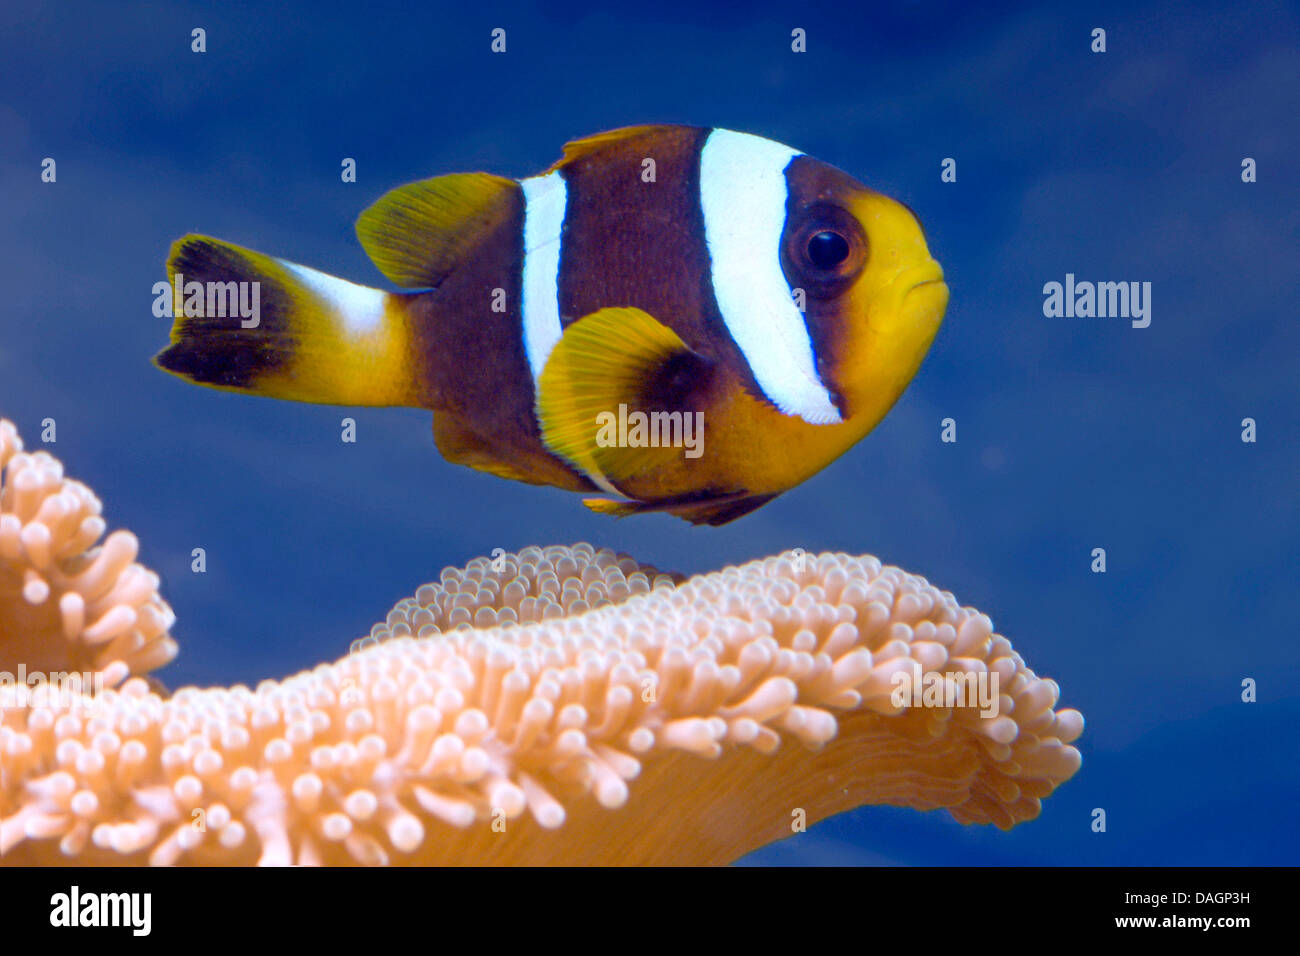 Mauritian anemonefish (Amphiprion chrysogaster), swimming above coral Stock Photo